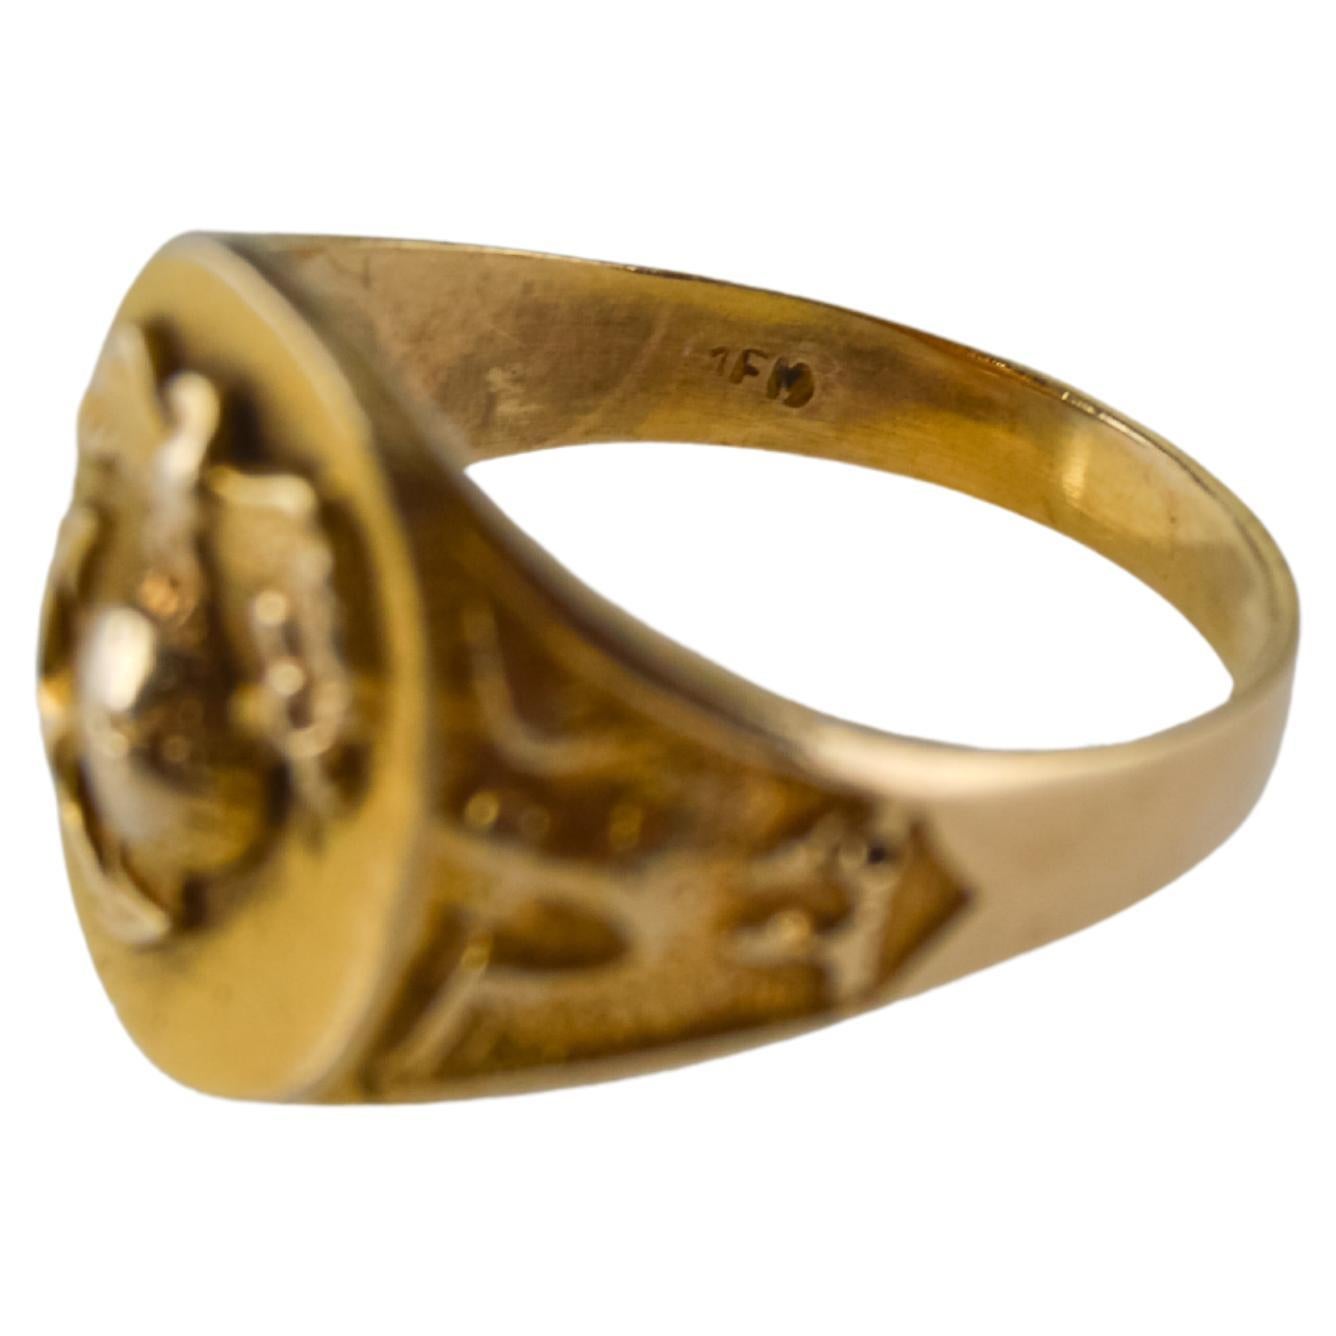 Art Deco 10 Karat Yellow Gold Signet Ring Sized to 6 1/2, 1930s, Hand Made For Sale 1